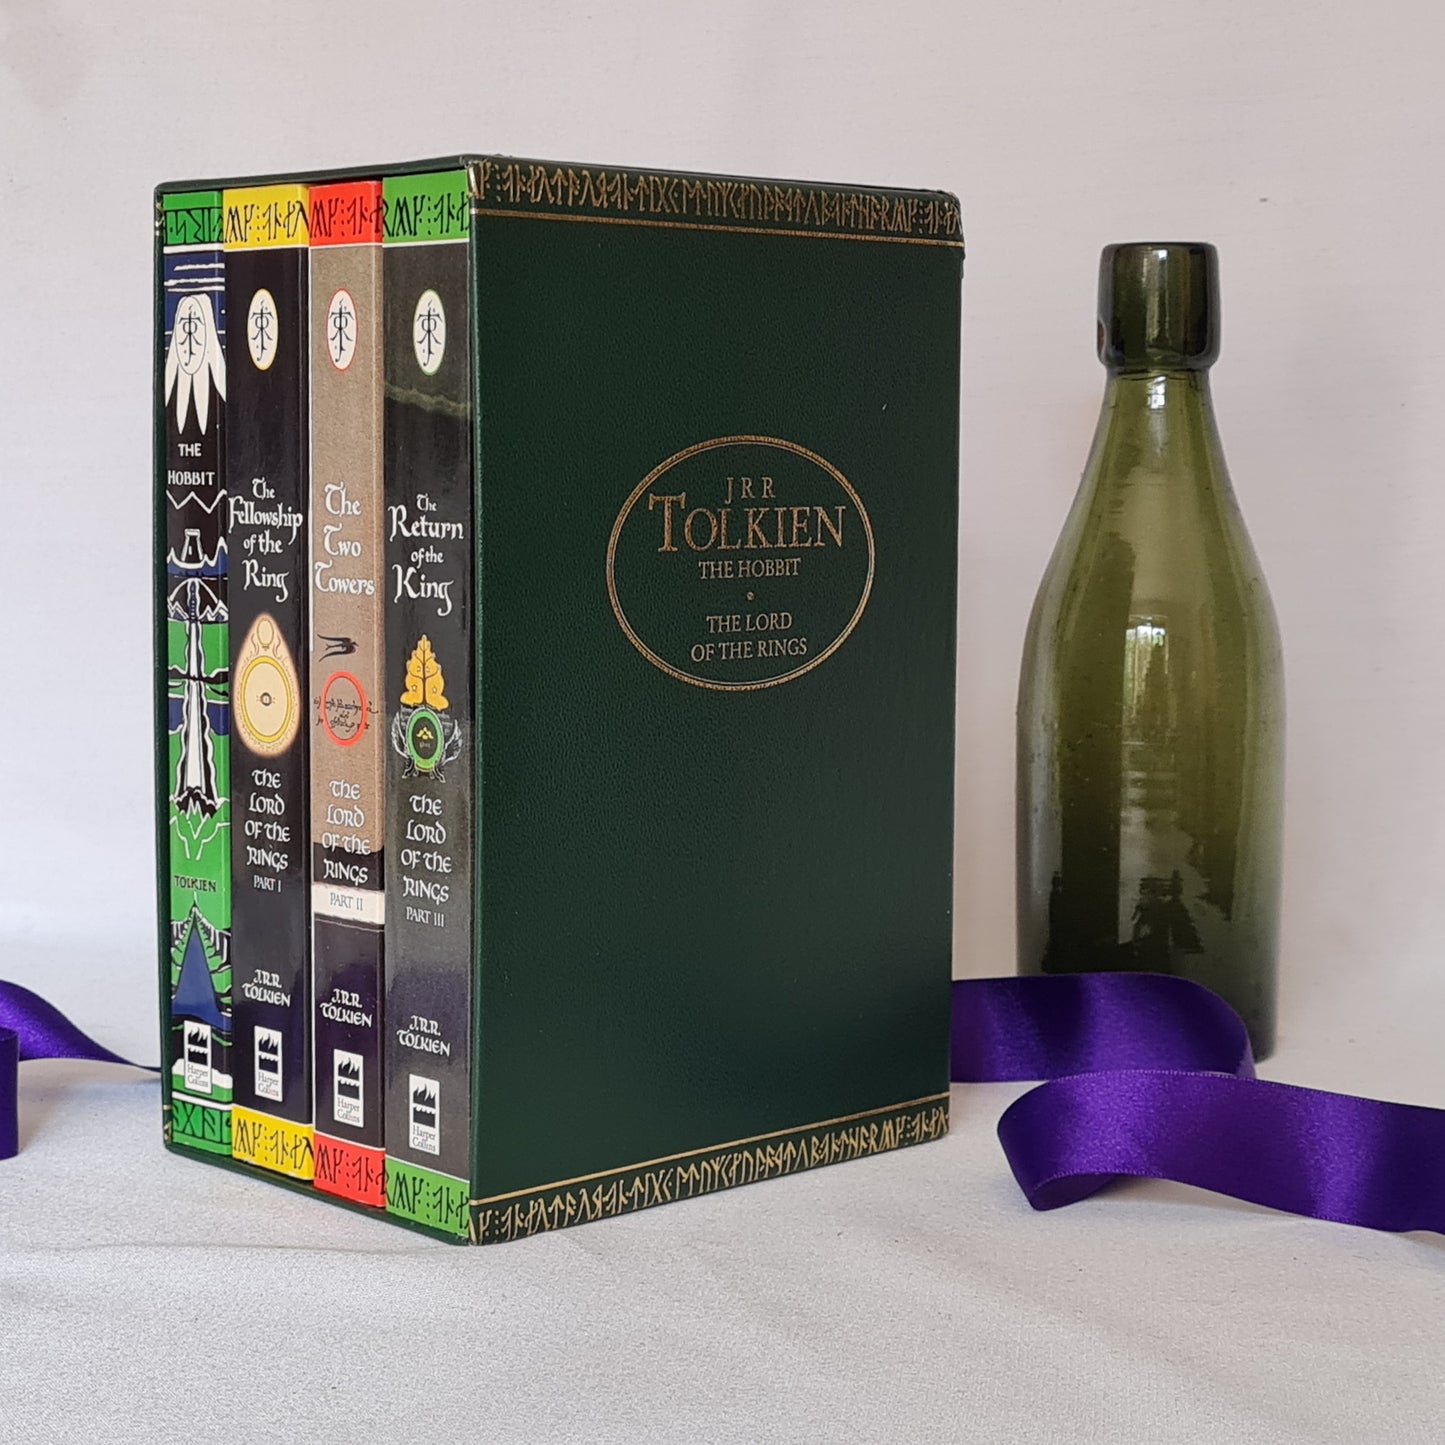 1997 Shrink Wrapped Unopened JRR Tolkien Boxed Set The Hobbit and The Lord of the Rings Trilogy / In Excellent Condition / Ted Smart, London